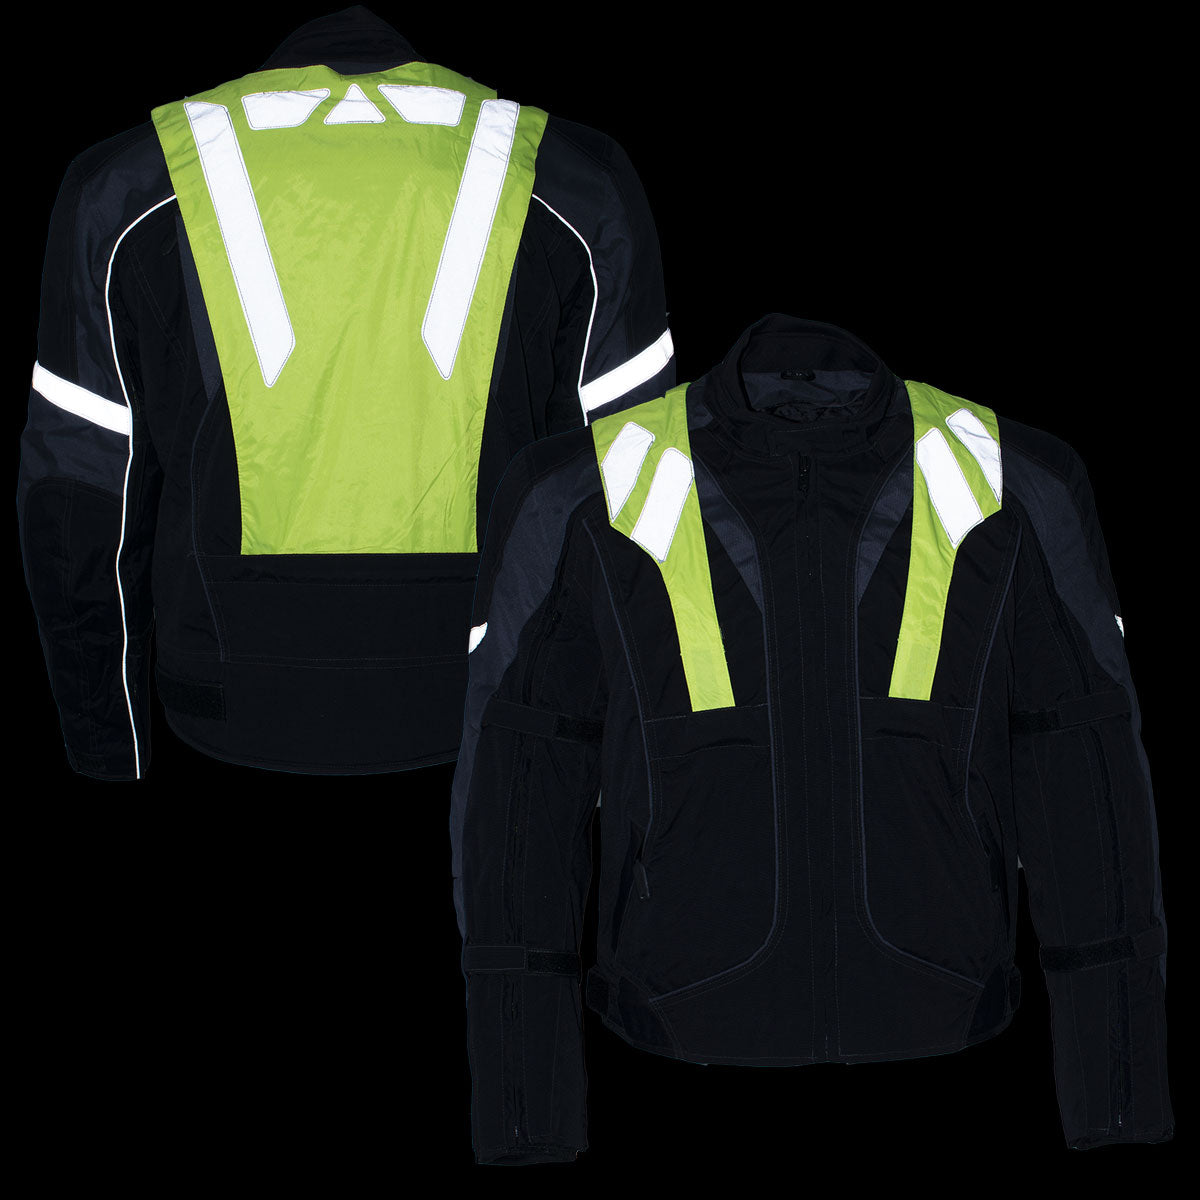 NexGen SH2325 Men's Armored Two in One Textile and Mesh Racing Jacket with Retractable Hi Viz Protection